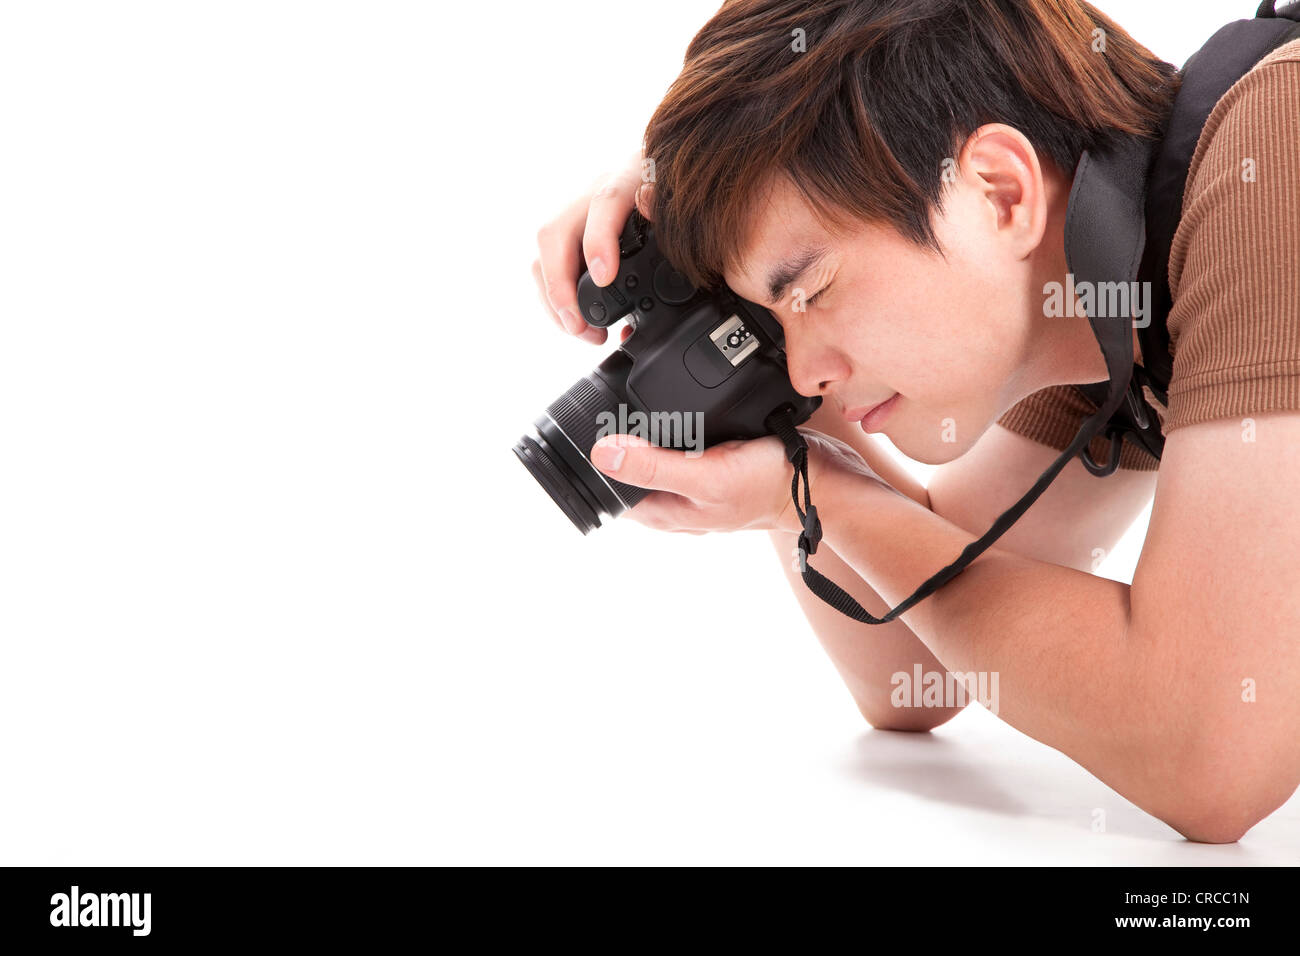 young man with photo camera Stock Photo